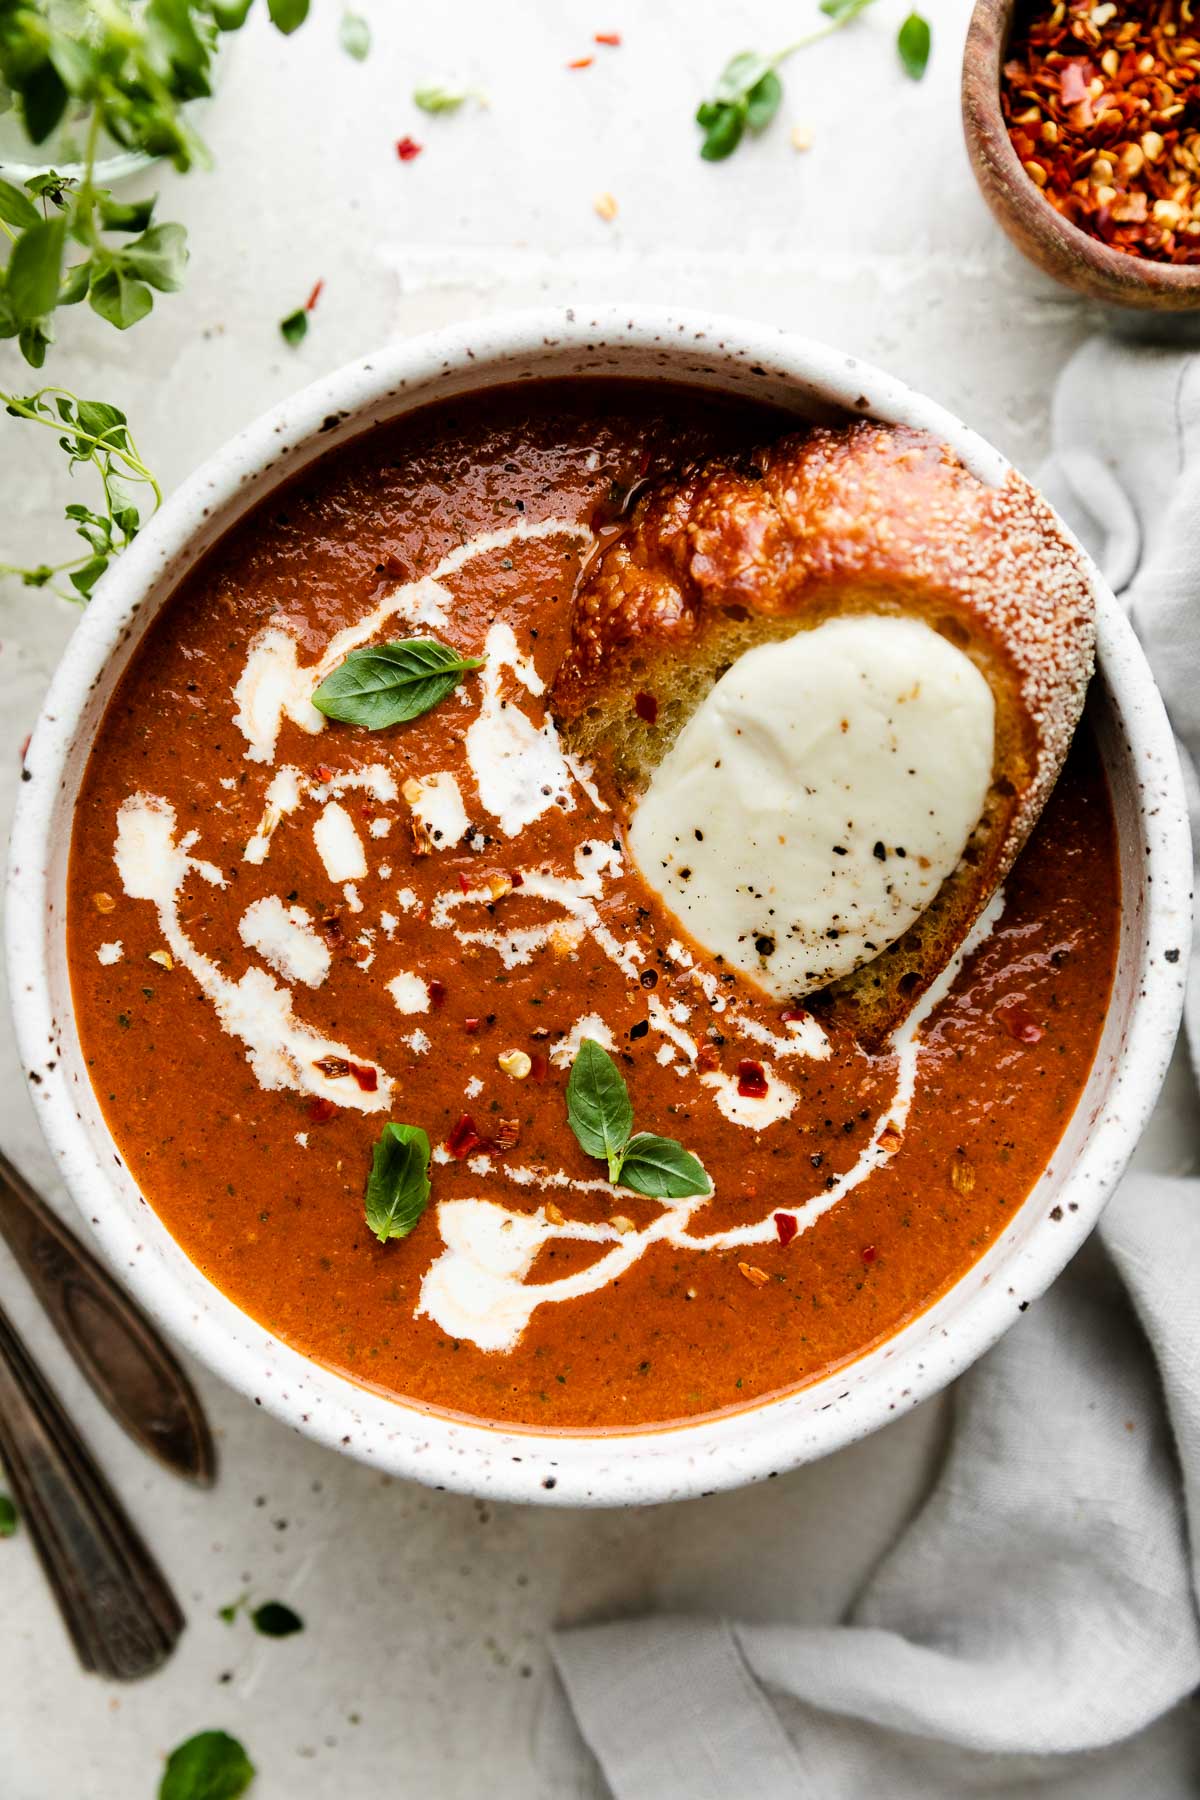 https://playswellwithbutter.com/wp-content/uploads/2021/09/Roasted-Tomato-Soup-27.jpg